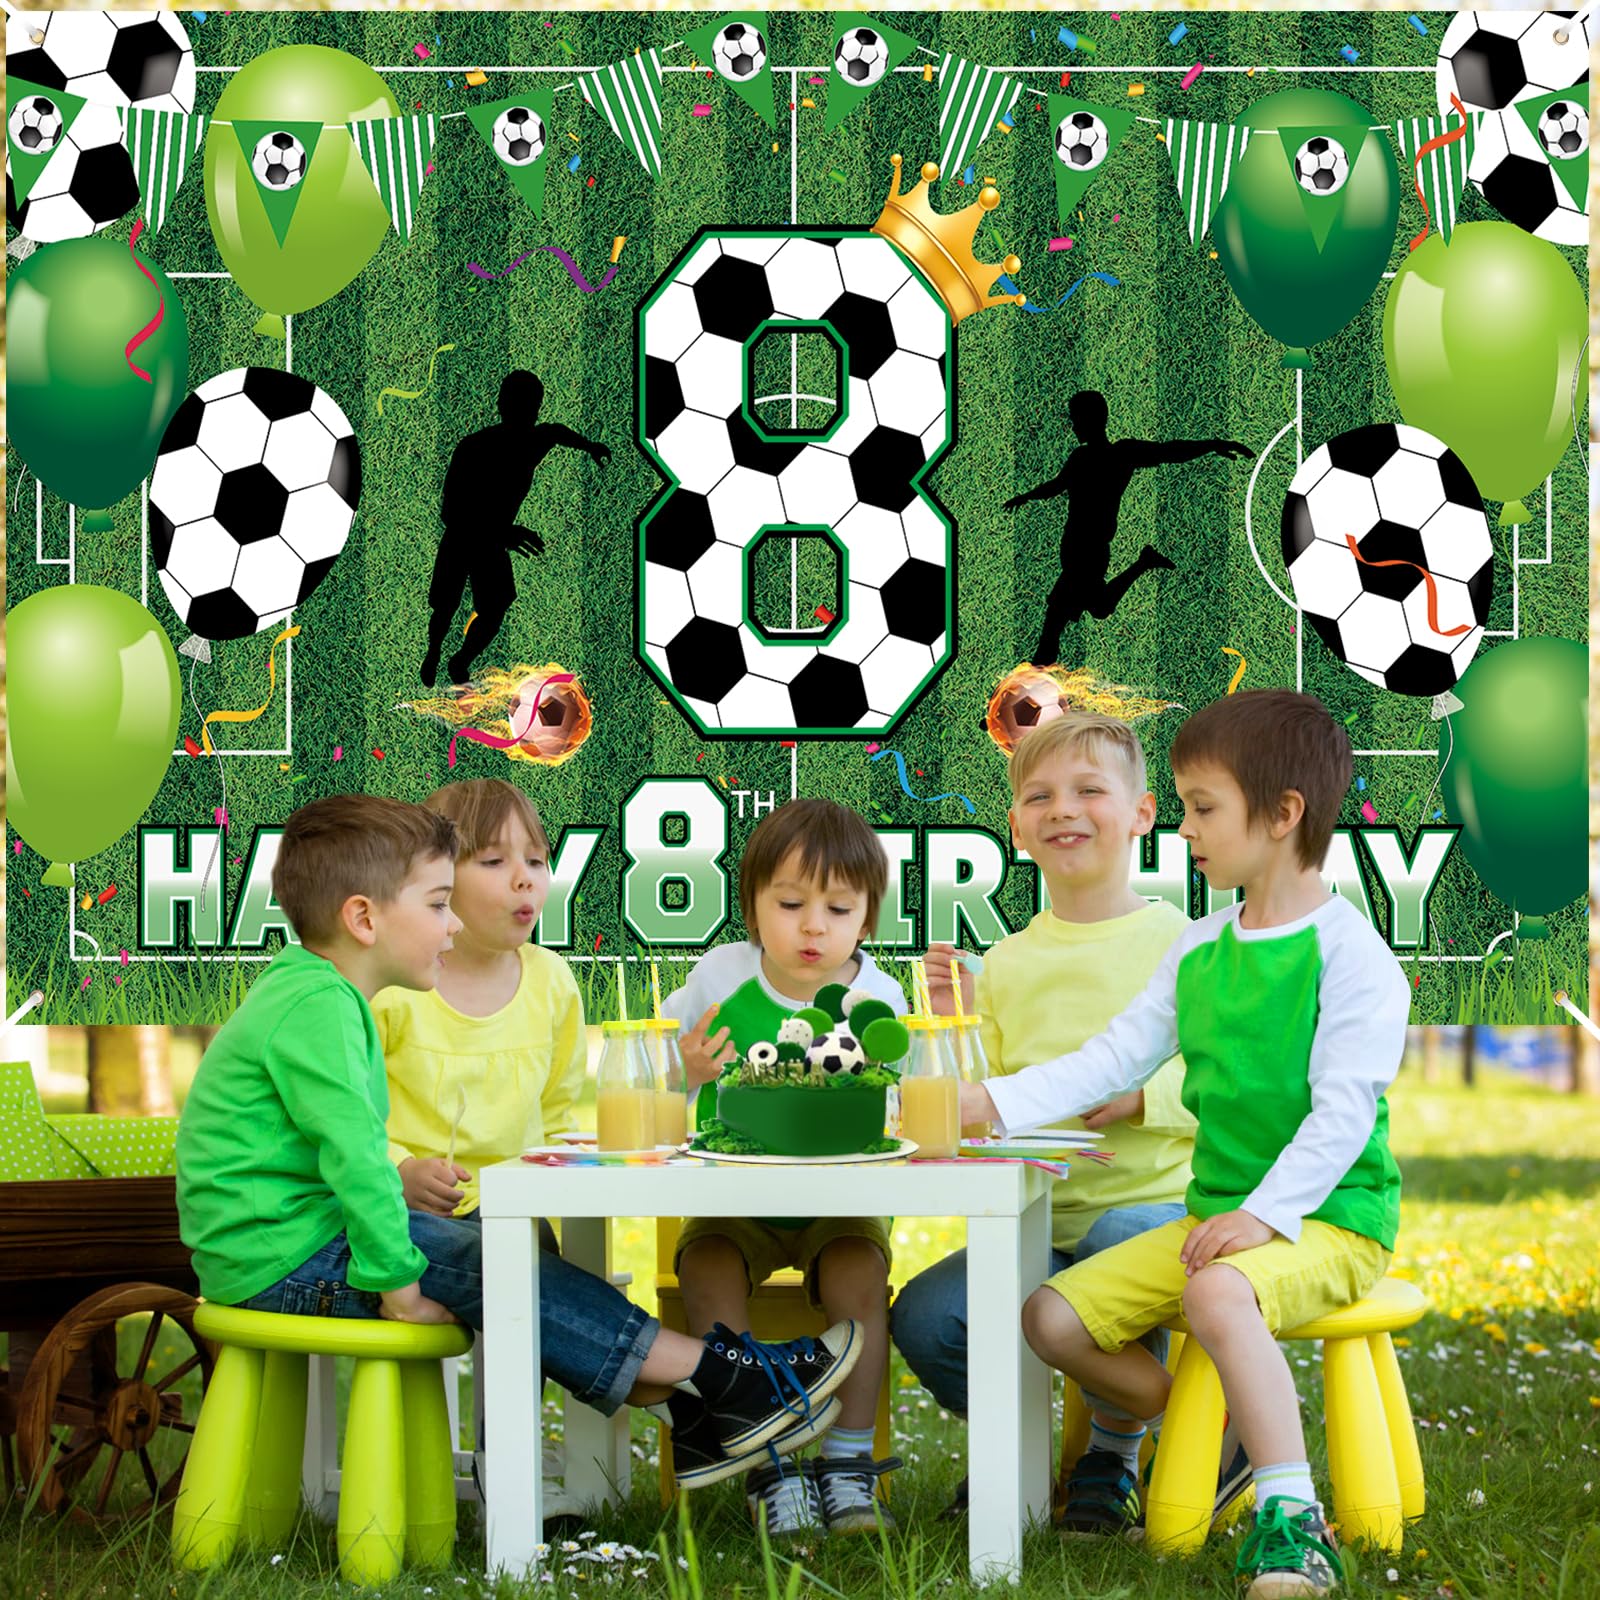 Soccer 8th Birthday Party Decorations Soccer Happy 8th Birthday Banner for Boys Kids Teens Large Sport Themed Birthday Banner for Soccer Football 8th Birthday Anniversary Party Supplies